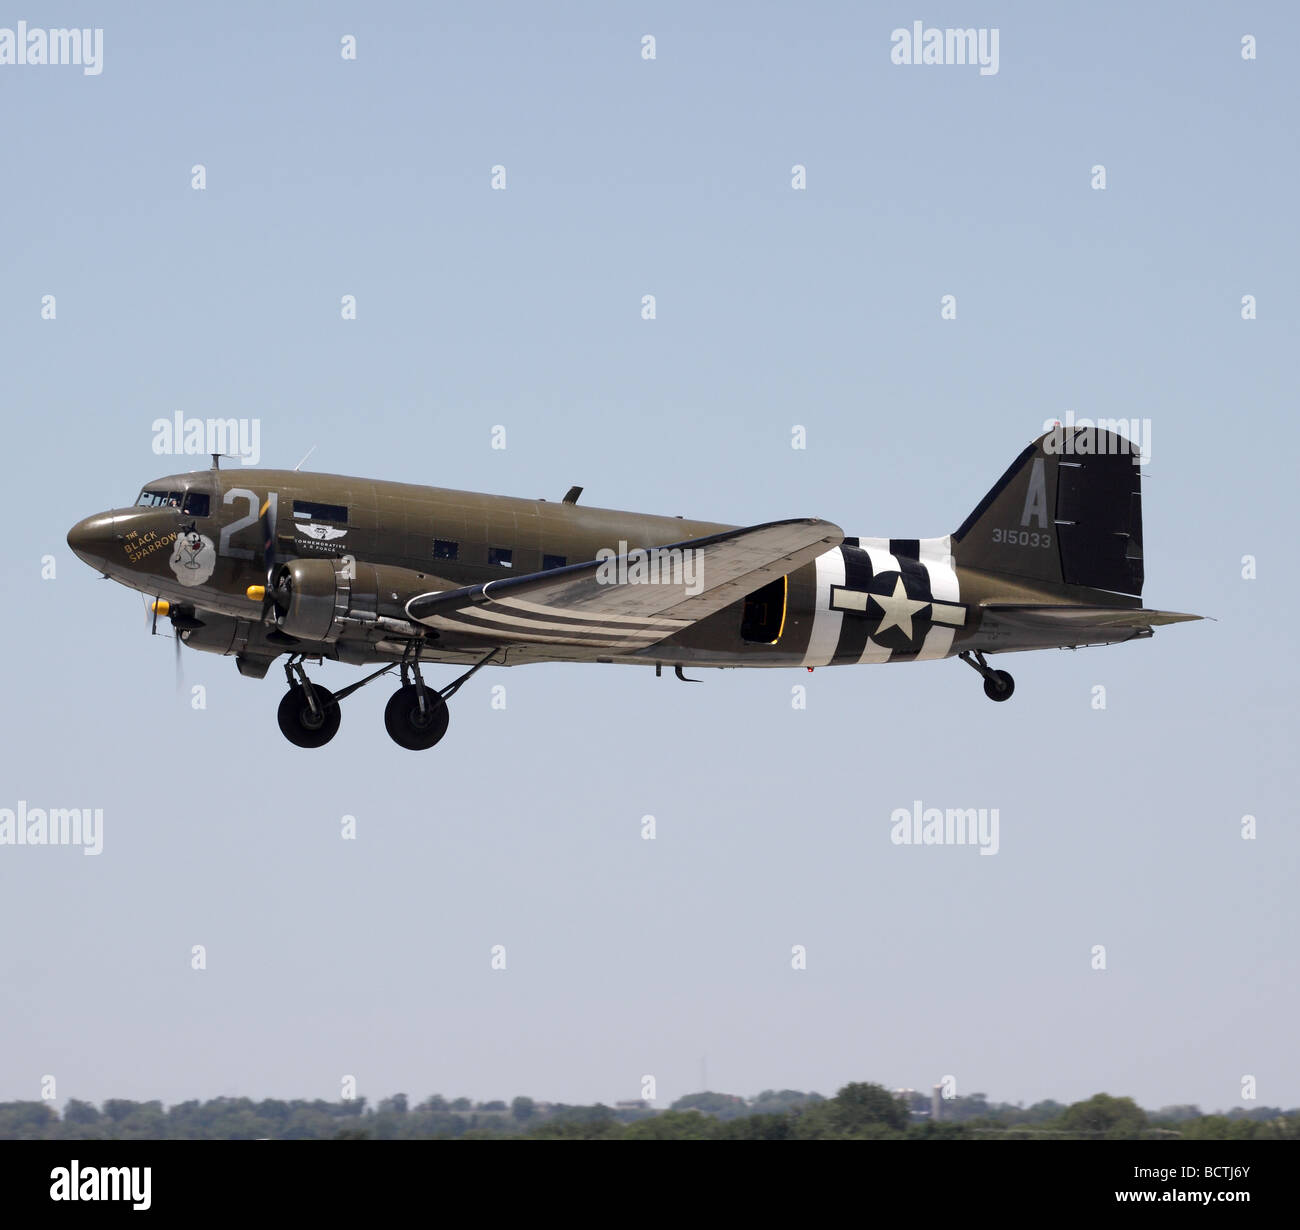 A Douglas C-47 warbird peforms a fly-by at an air show in Janesville, Wisconsin.  This plane is operated by the Commemorative Air Force. Stock Photo